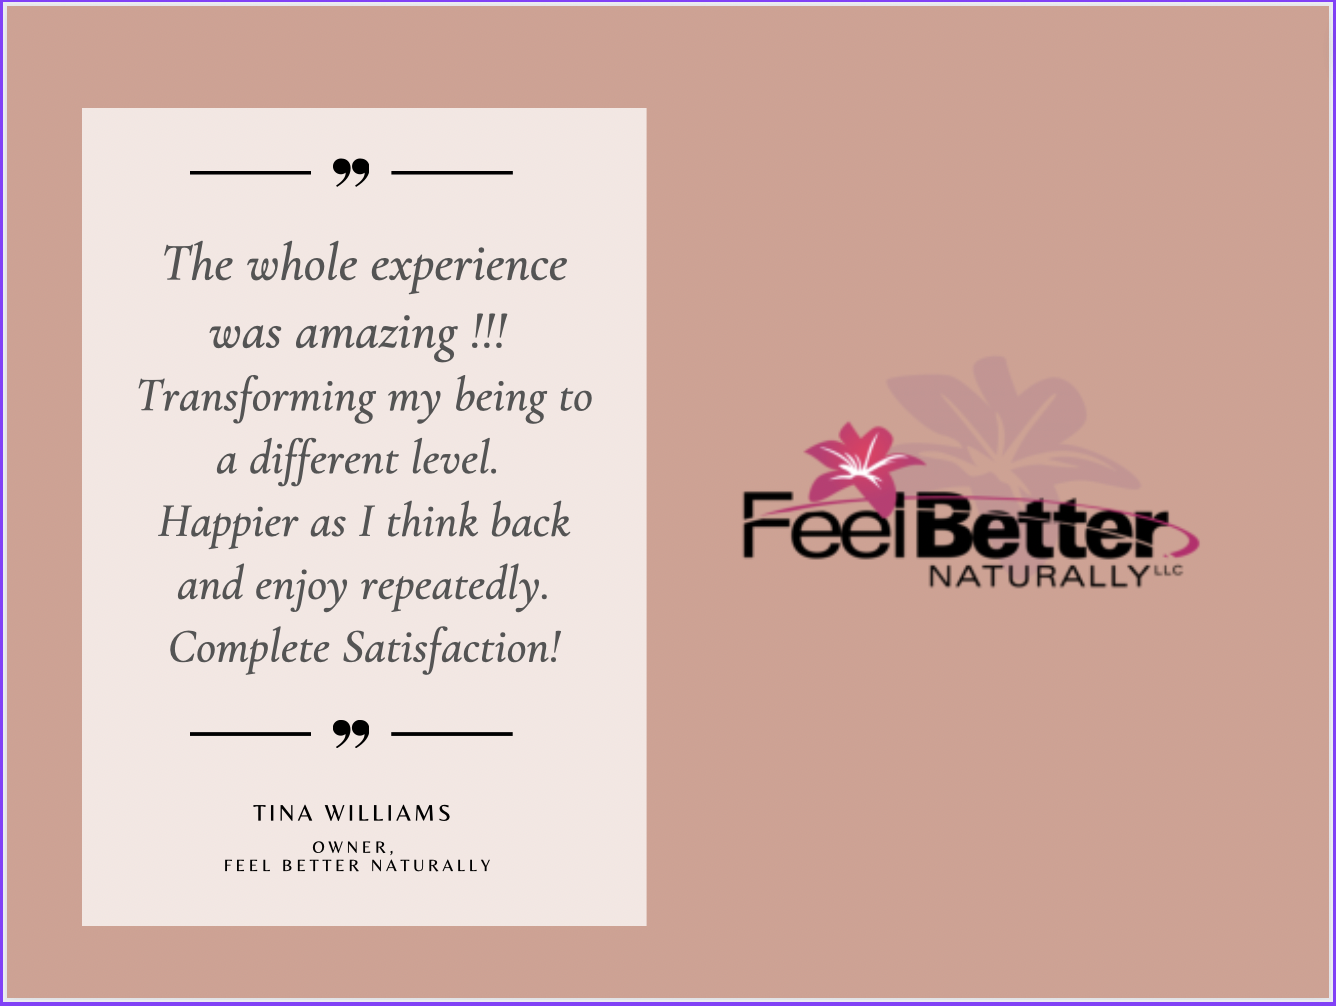 Tina Williams, Owner of Feel Better Naturally, Alaska's Top Hydrotherapy Colonics shares her testimonials of her Crystalline Quantum Experience by Jessy Furniel